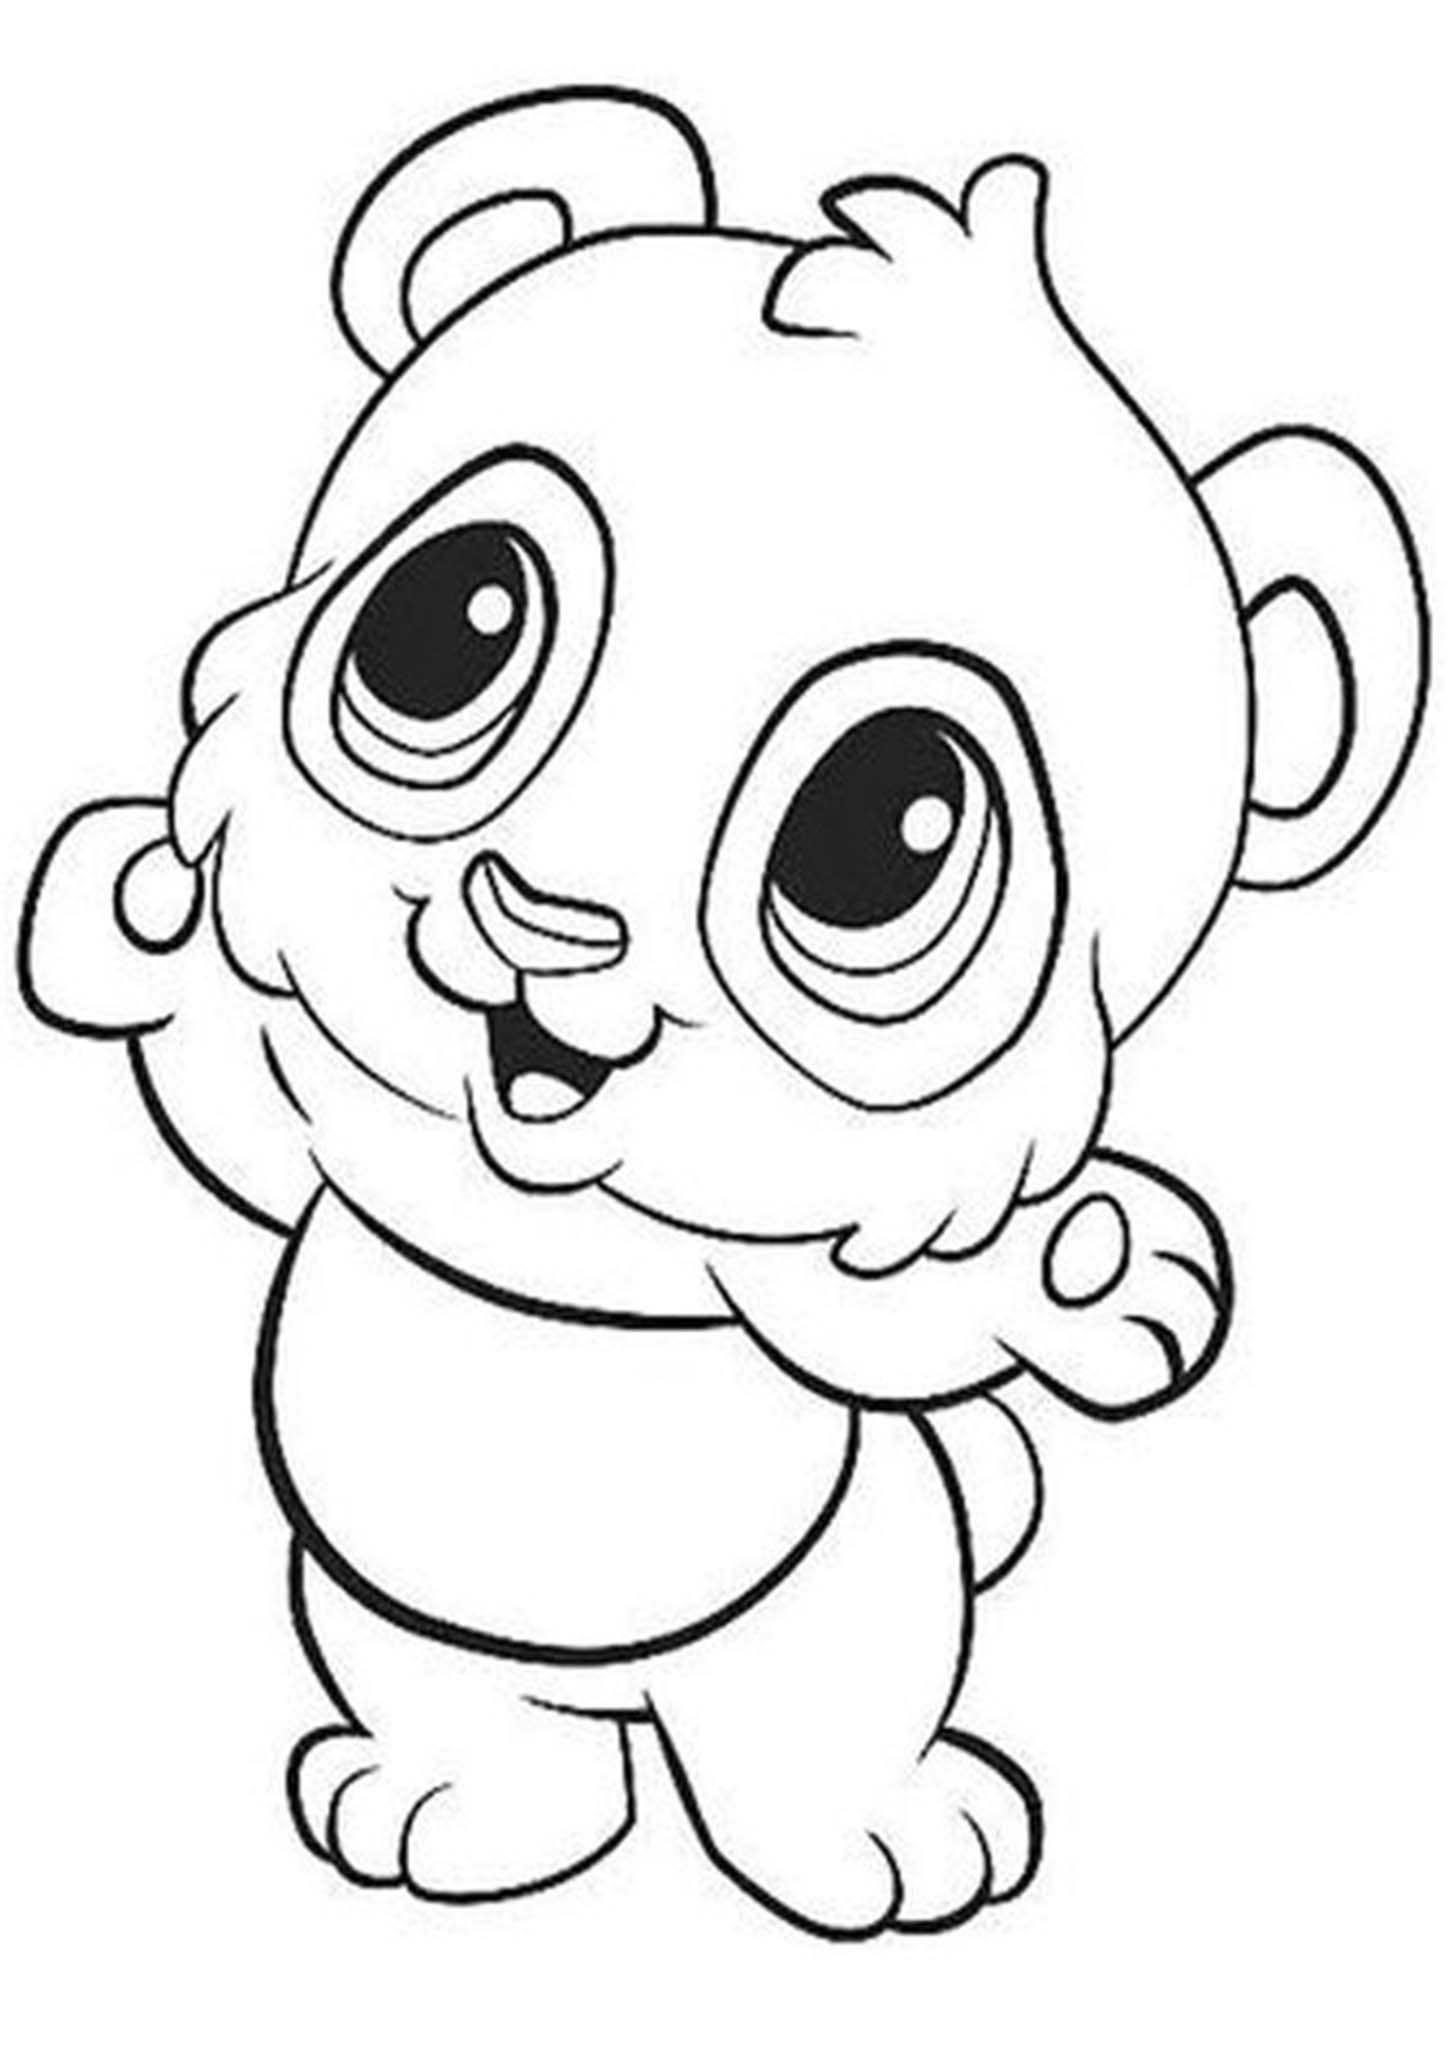 Printable Panda Coloring Pages - Customize and Print